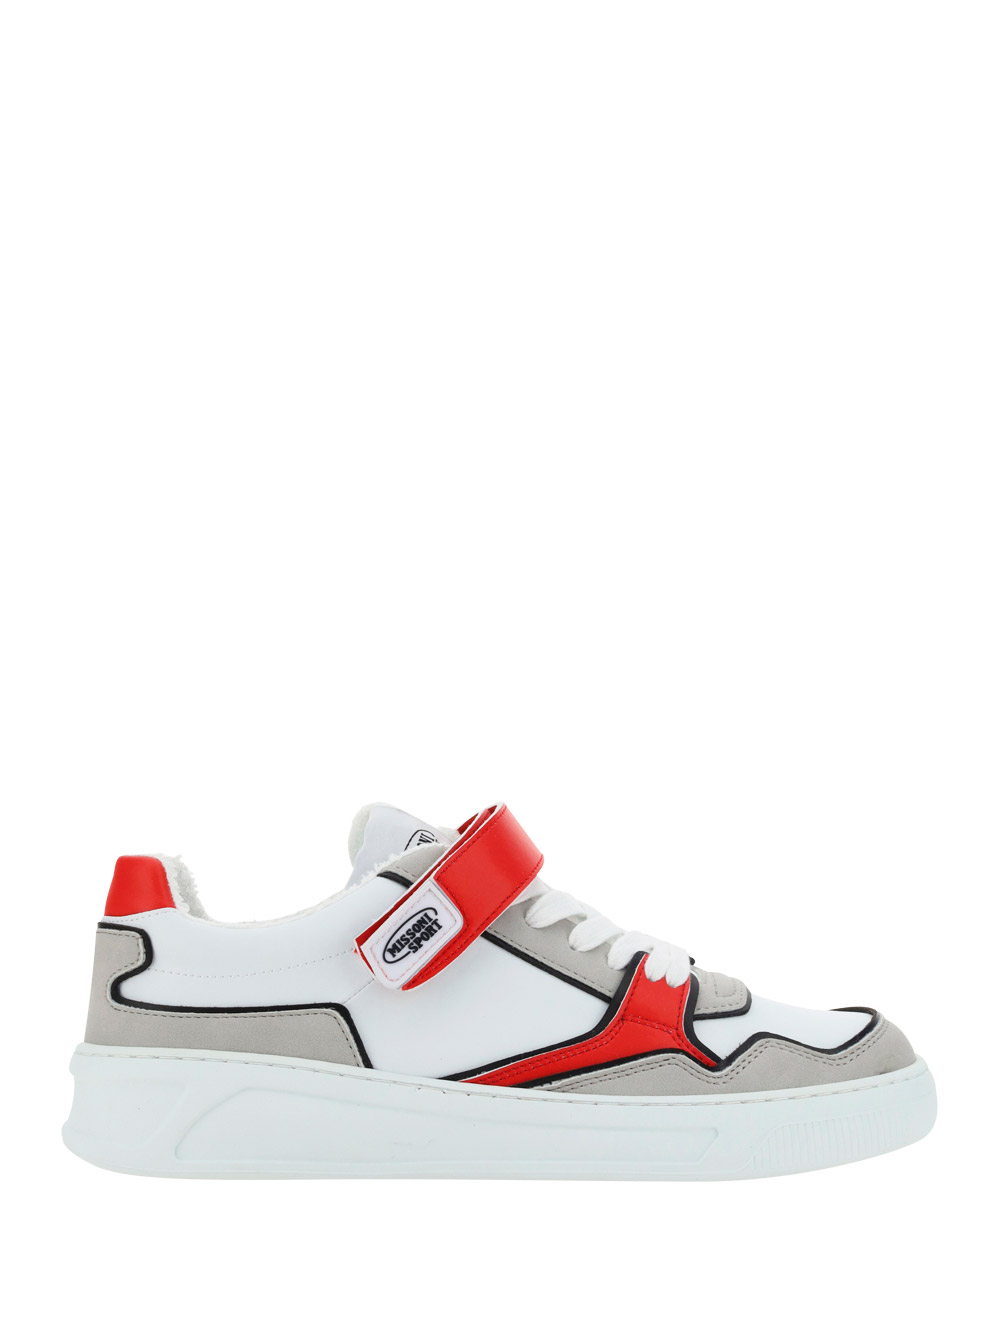 Acbc X Missoni Sneakers In White/red